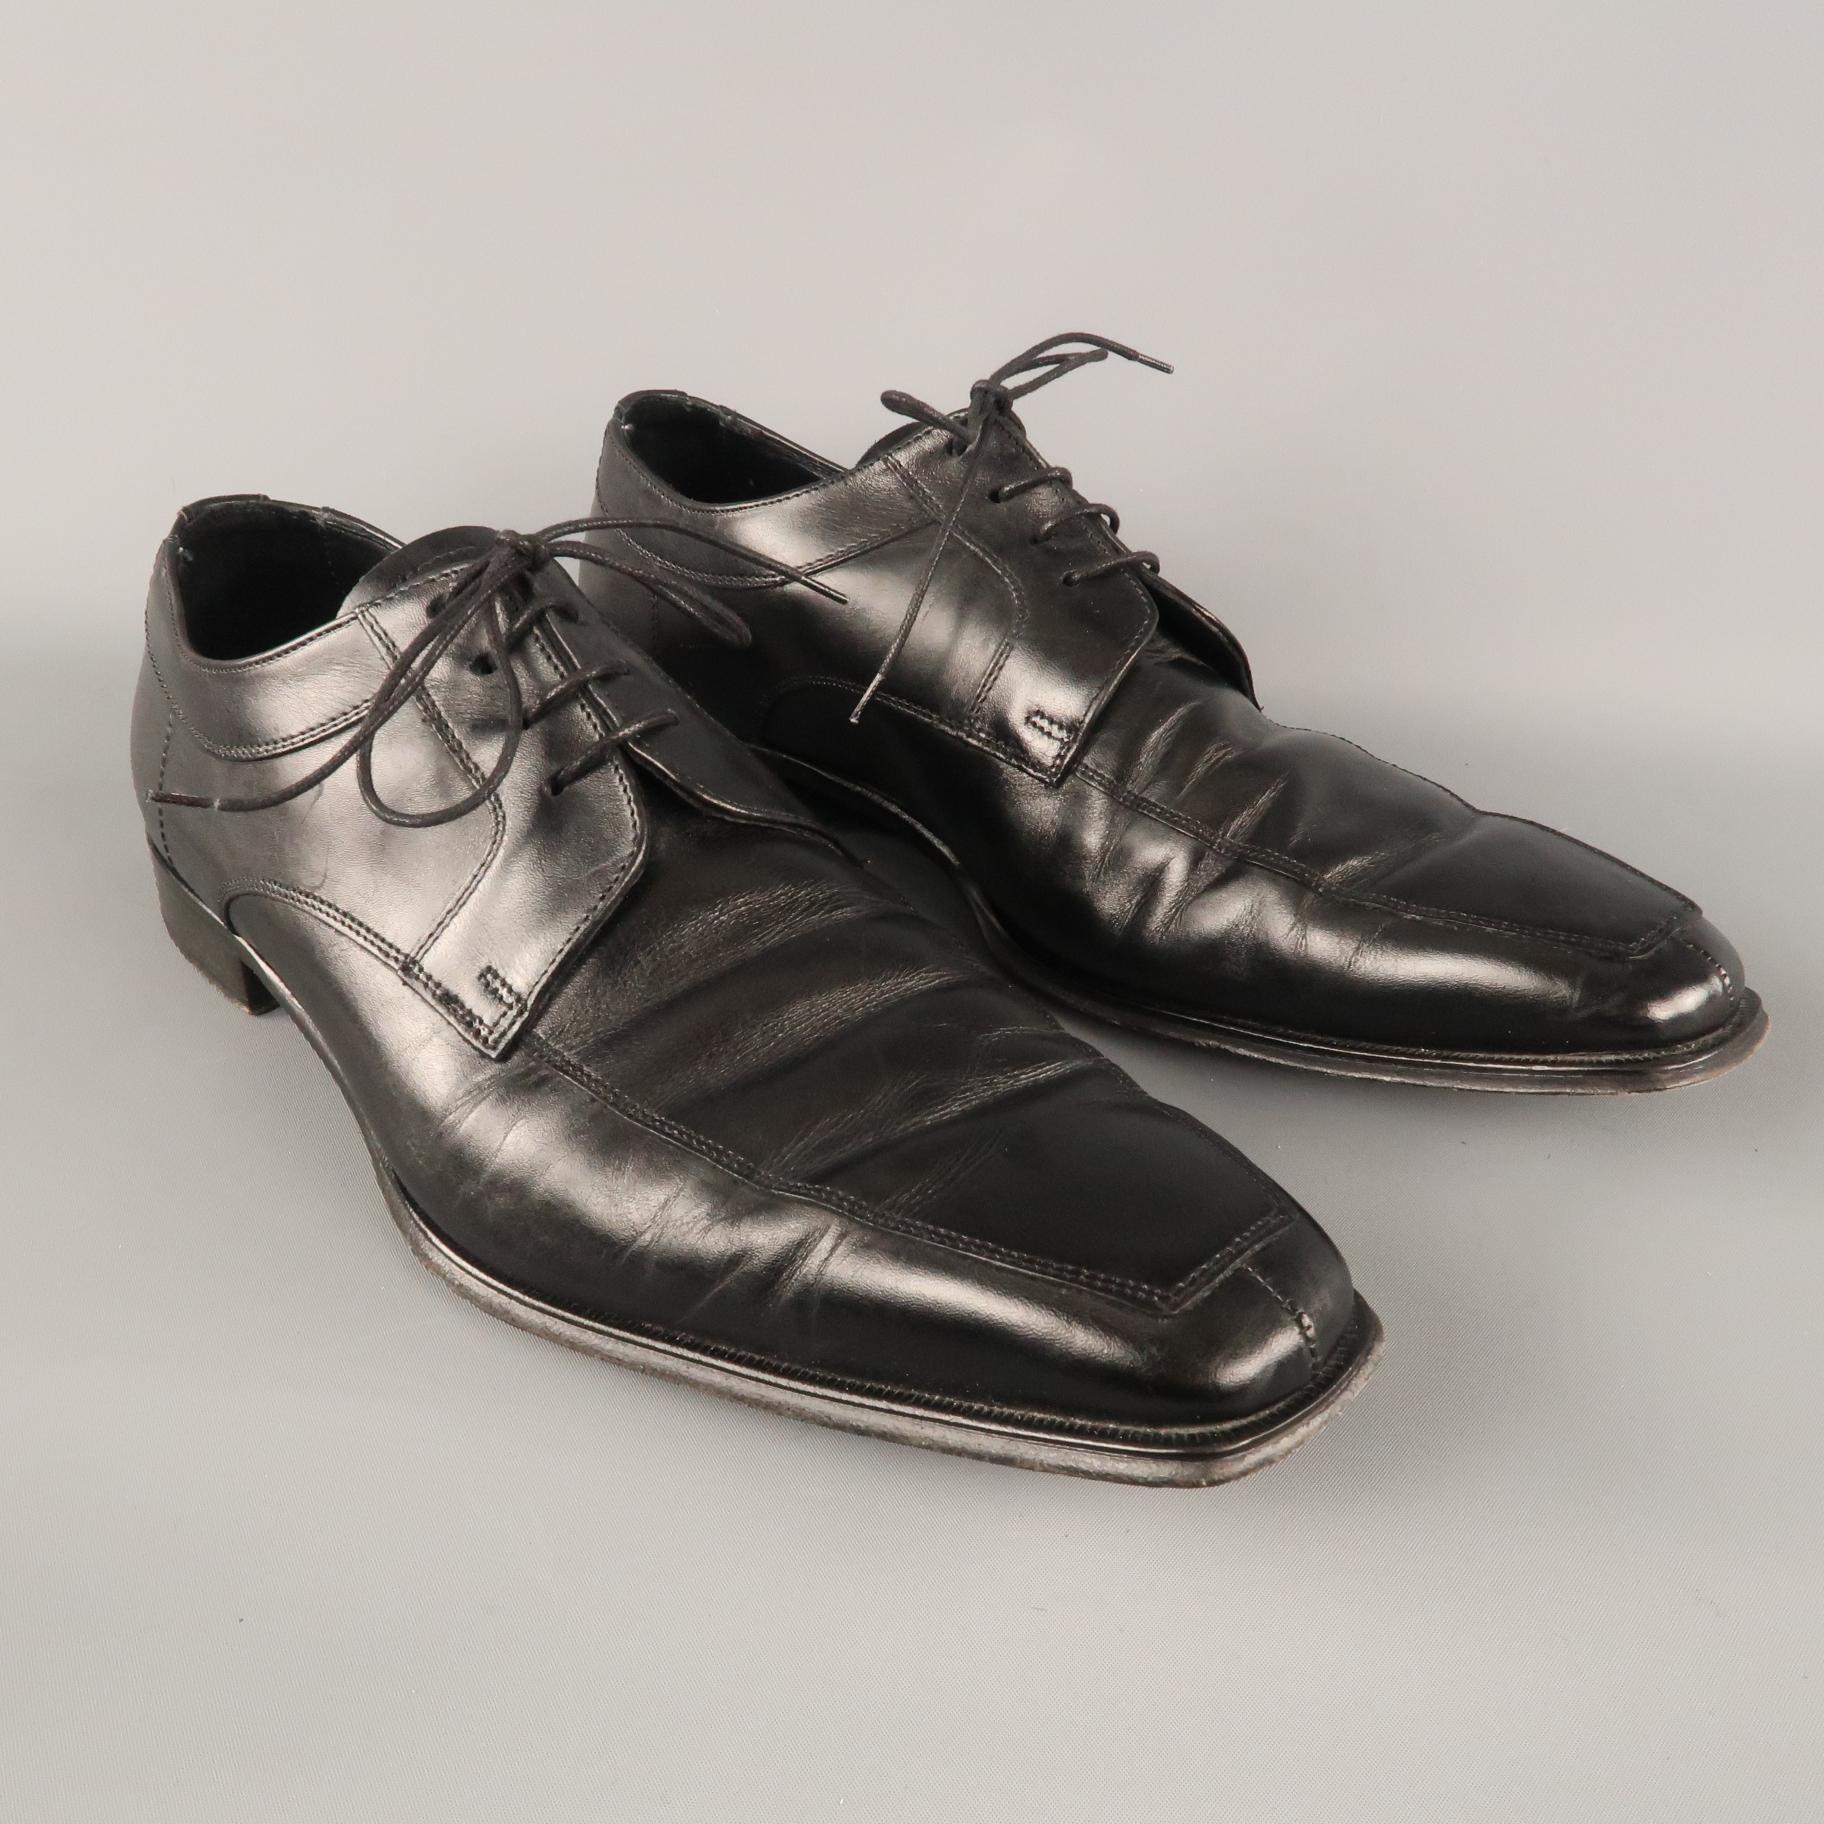 CANALI Lace up Shoes comes in a black tone in a solid leather material, with a heeled leather outsole.  With Box.  Made in Italy.
 
Very Good Pre-Owned Condition.
Marked: IT 46
 
Outsole: 13.5 x 4.5 in.